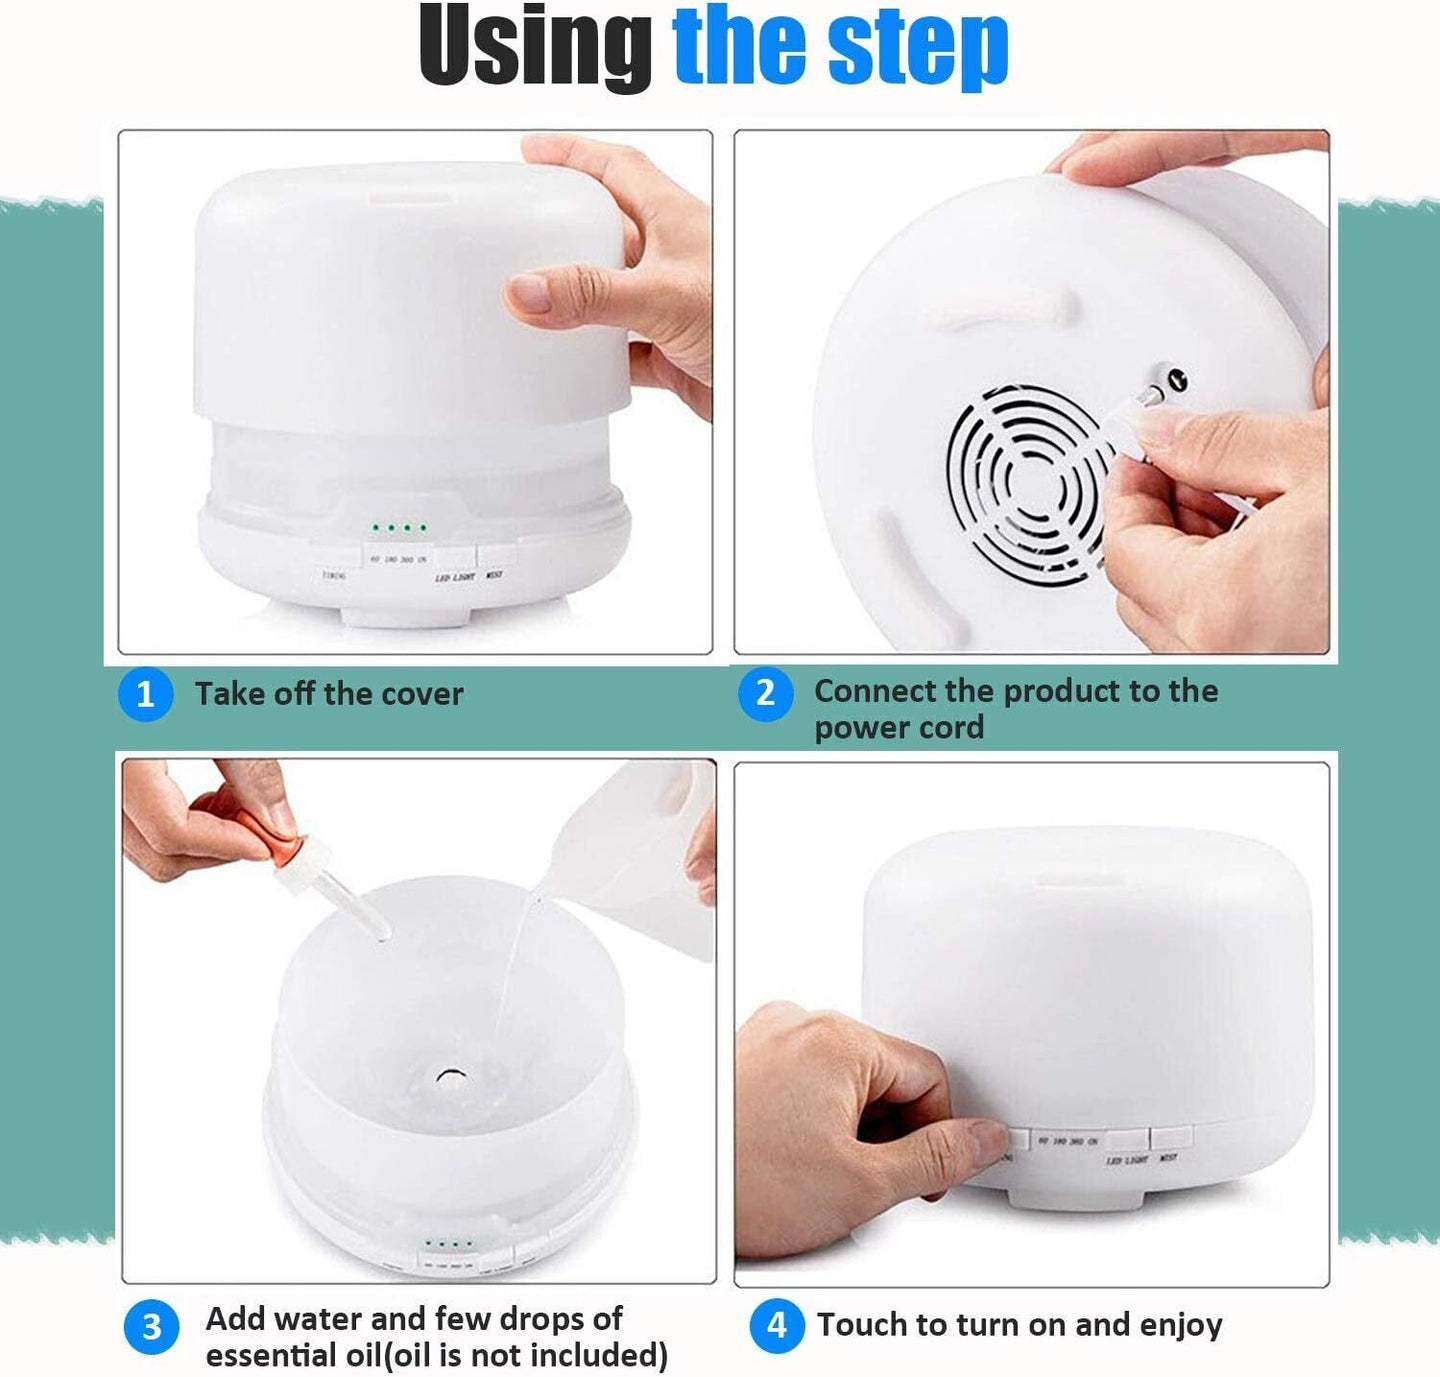 Aroma Aromatherapy Diffuser LED Oil Ultrasonic Air Humidifier Purifier 500ML white - Shoppers Haven  - Appliances > Aroma Diffusers & Humidifiers     